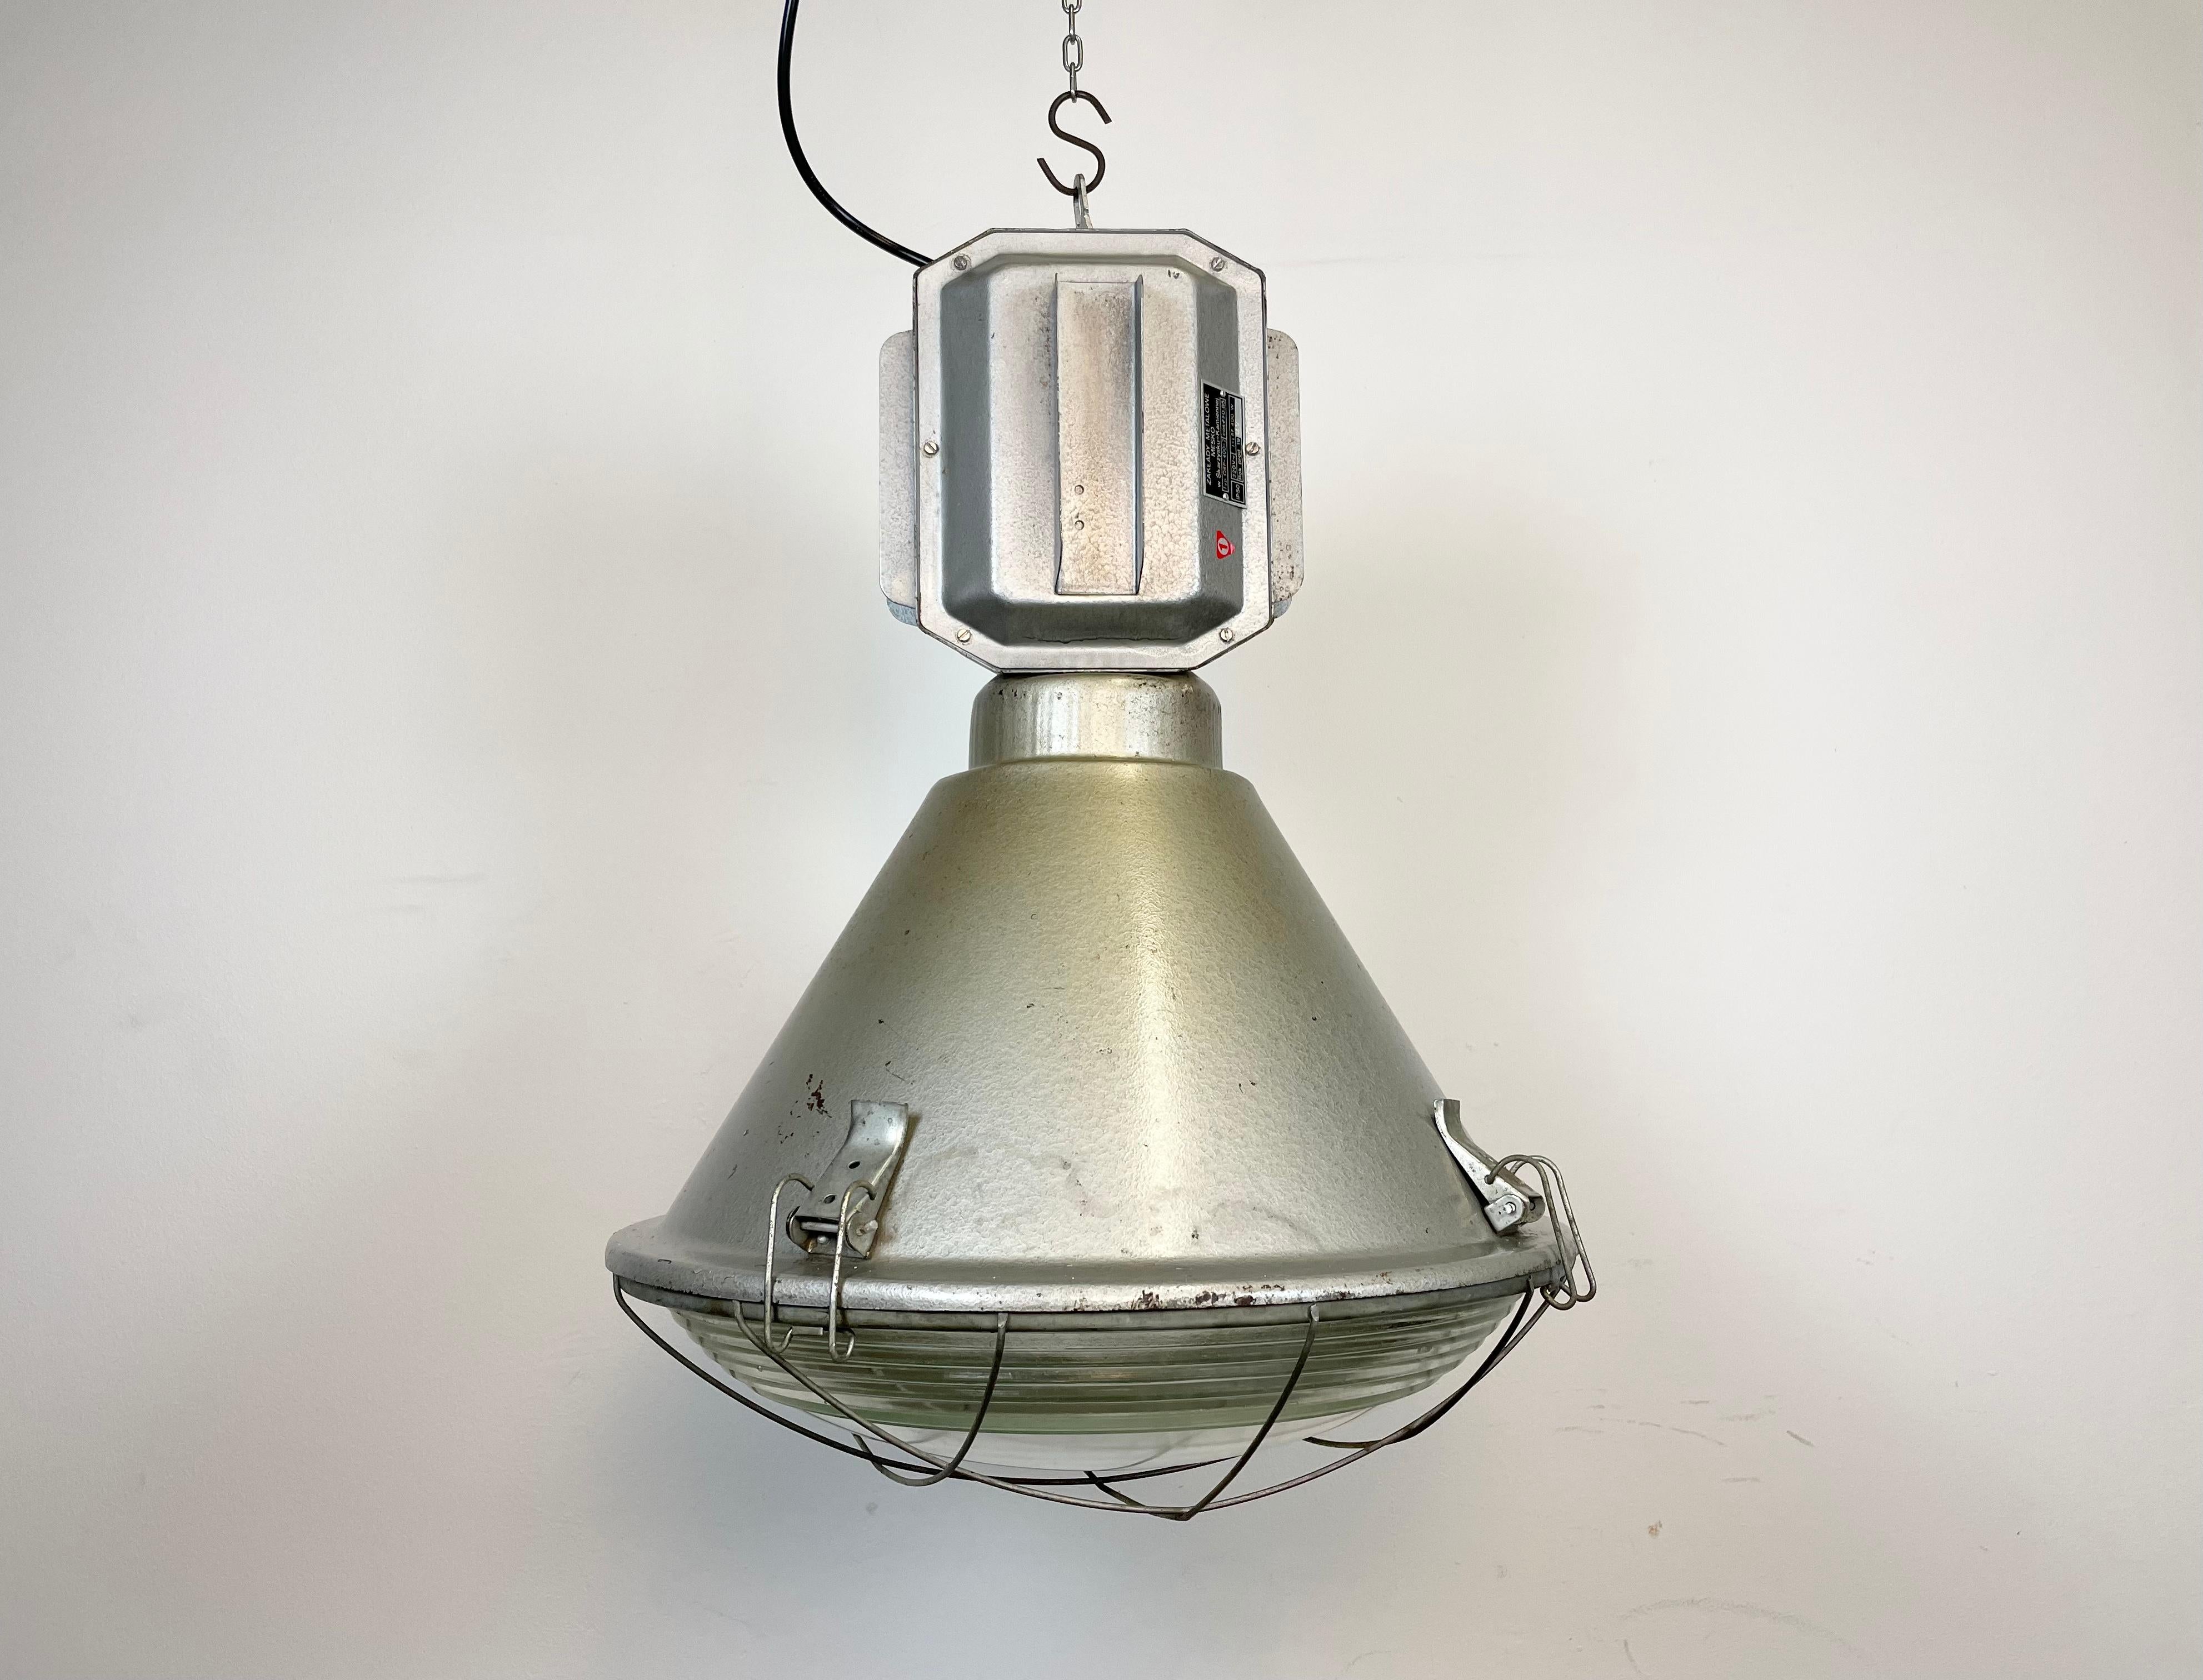 Impressive 'bomb' hanging lamp manufactured in 1990s by MESKO in Skarzysko-Kamienna in Poland. It features a hammerpaint iron body, a clear glass cover and an iron grid. New porcelain socket requires E 27 light bulbs. New wire. The weight of the